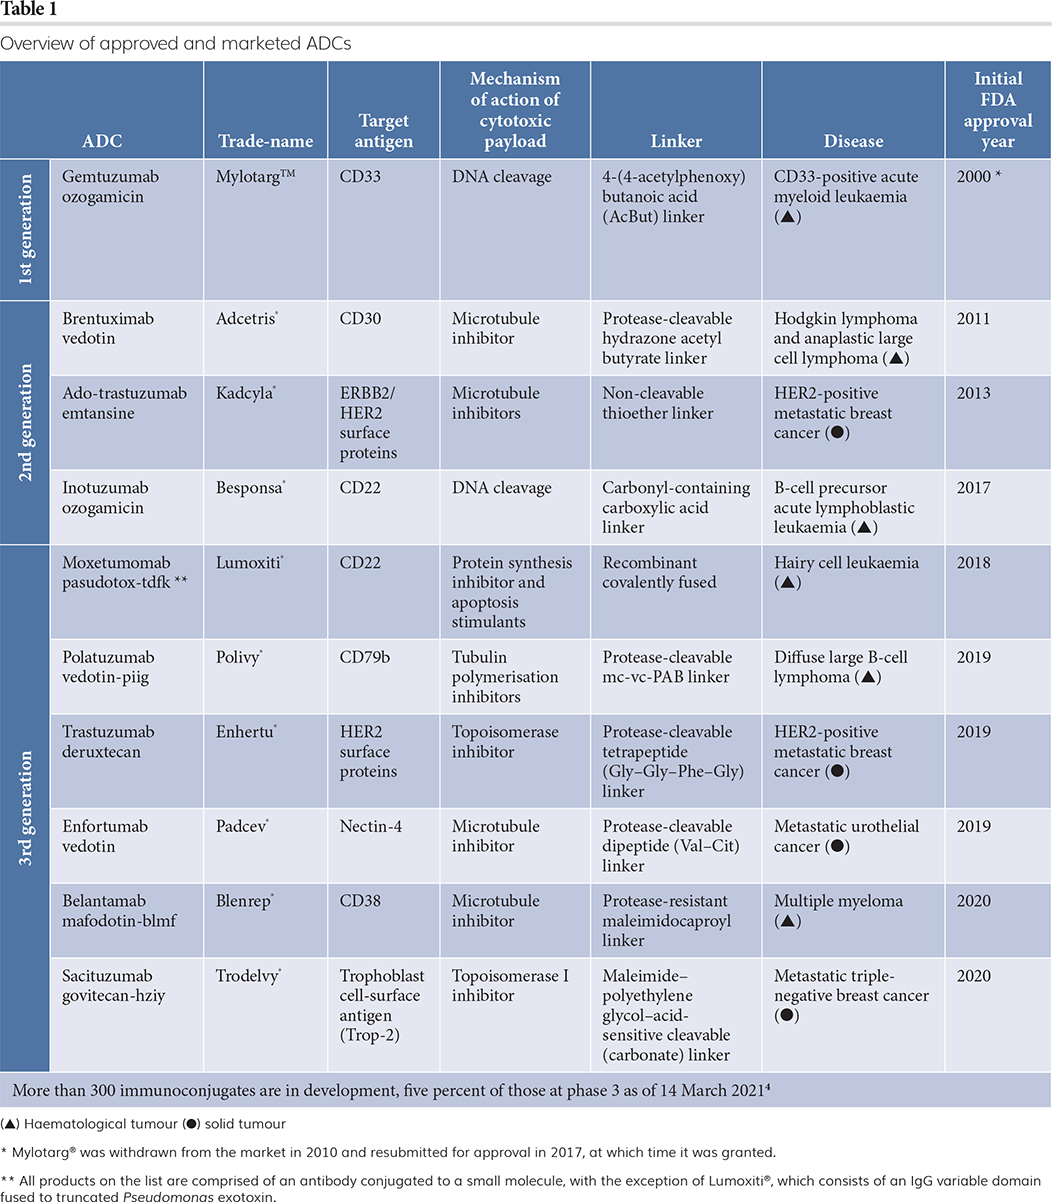 Table 1: Overview of approved and marketed ADCs